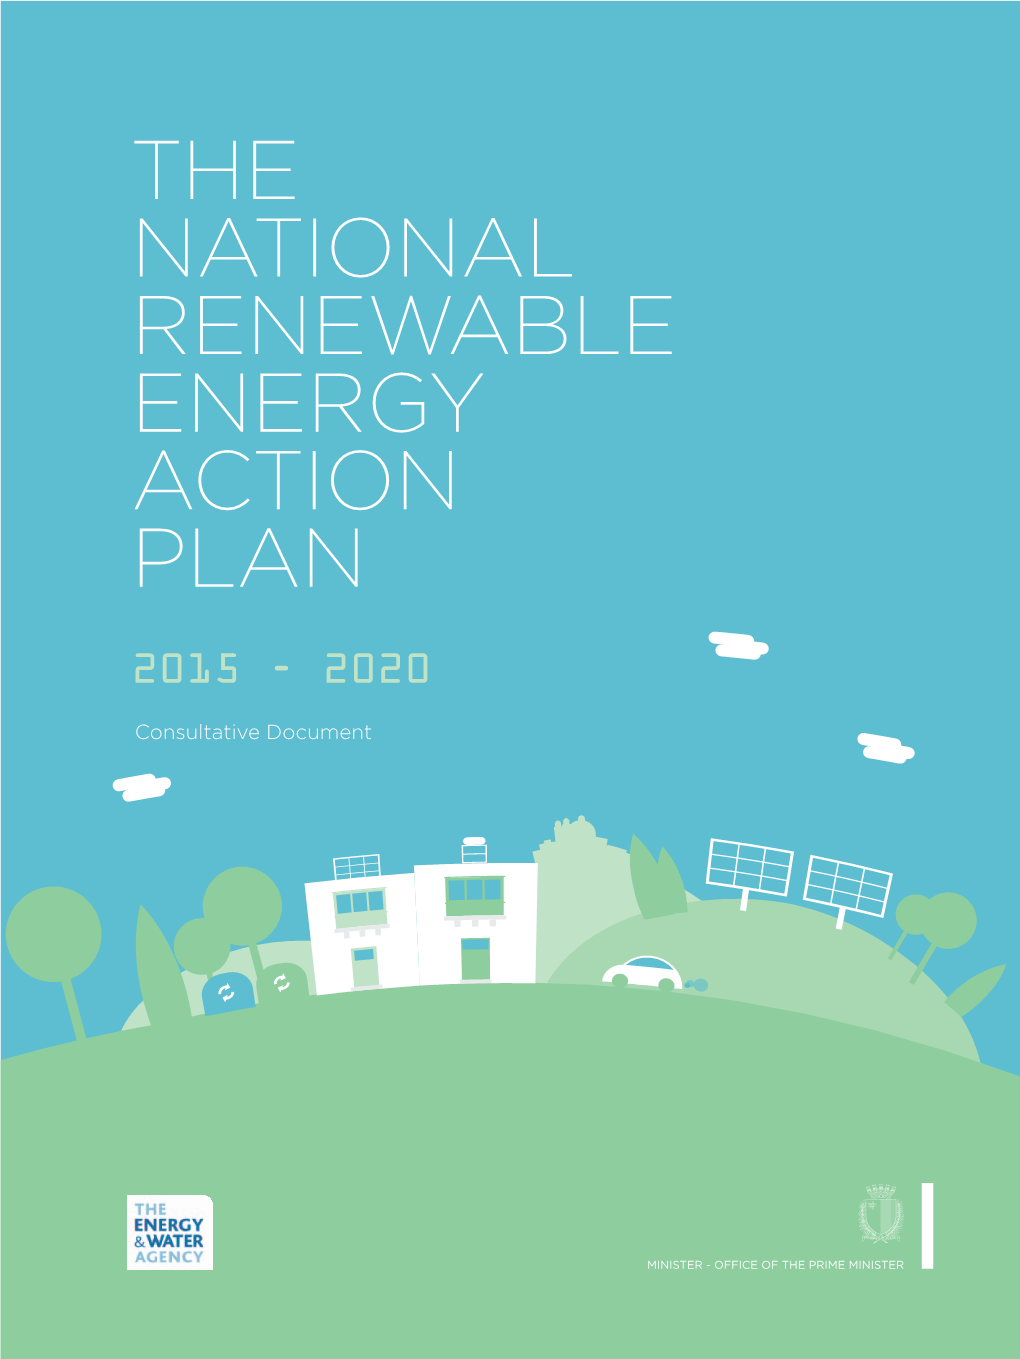 The National Renewable Energy Action Plan 2015 - 2020 the NATIONAL RENEWABLE ENERGY ACTION PLAN